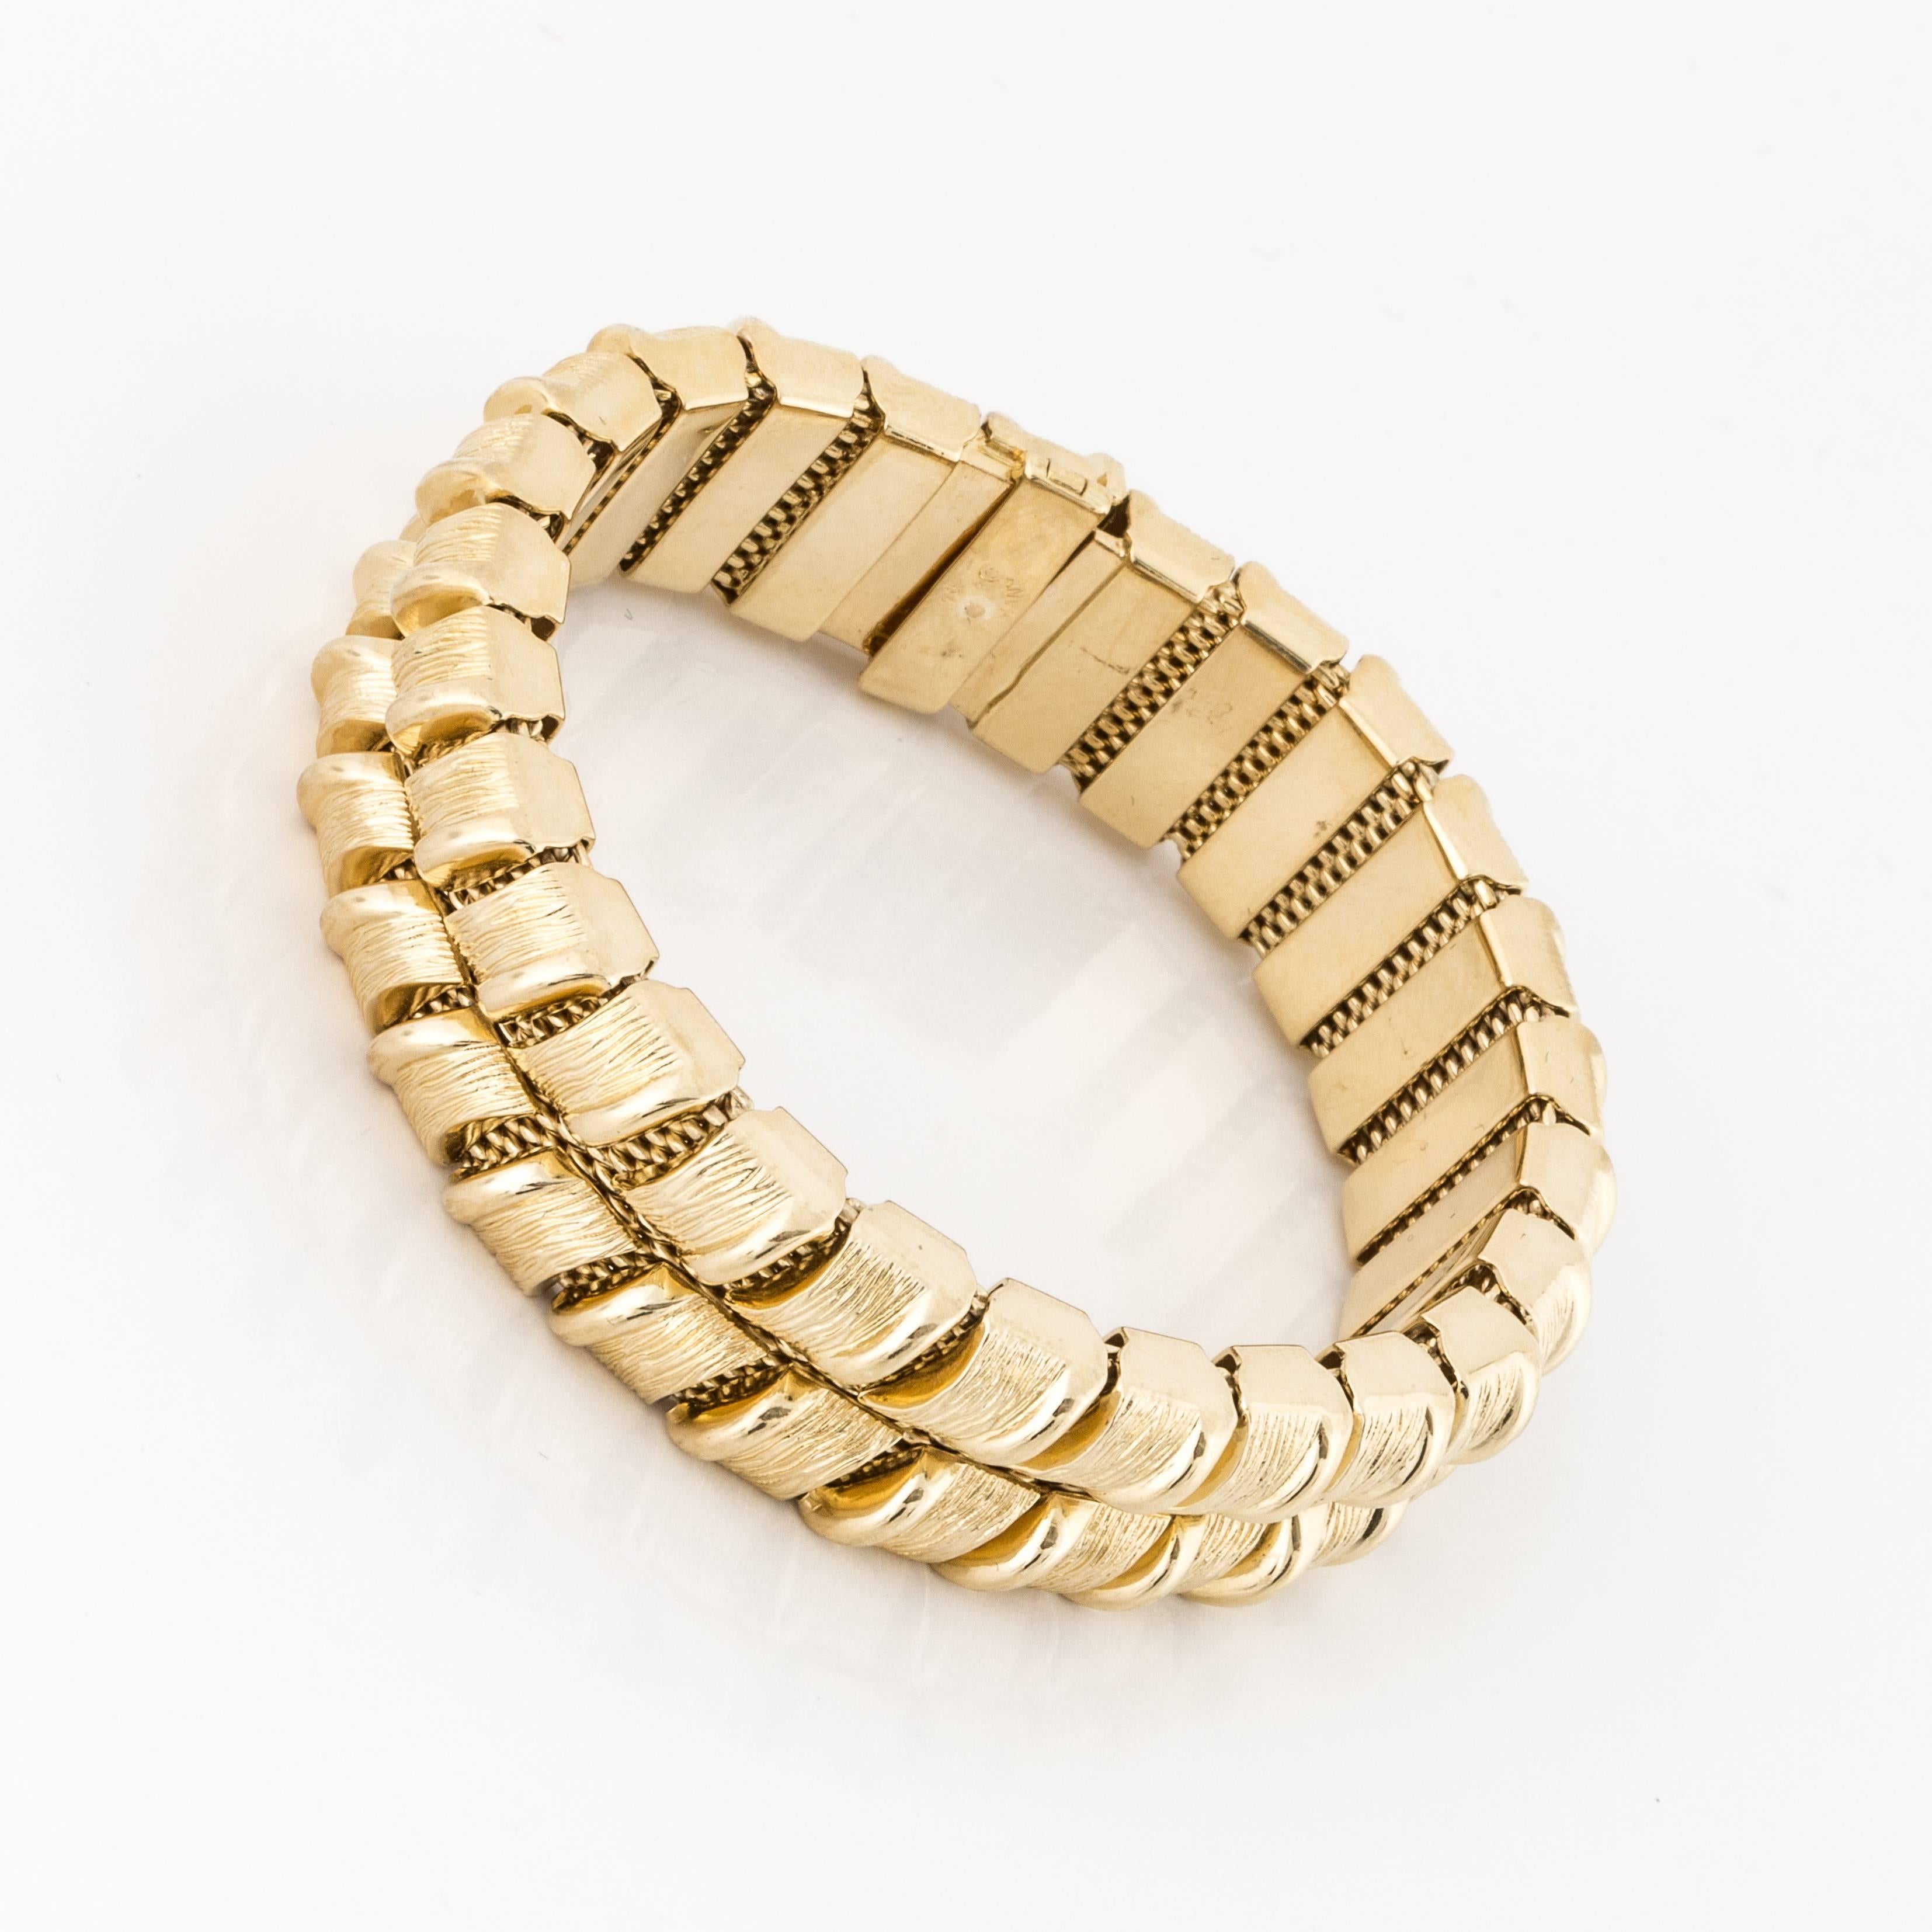 Tiffany & Co. bracelet in 18K yellow gold.  It was made in Germany in the 1970's.  Measures 7 inches long and 9/16 inches wide. 